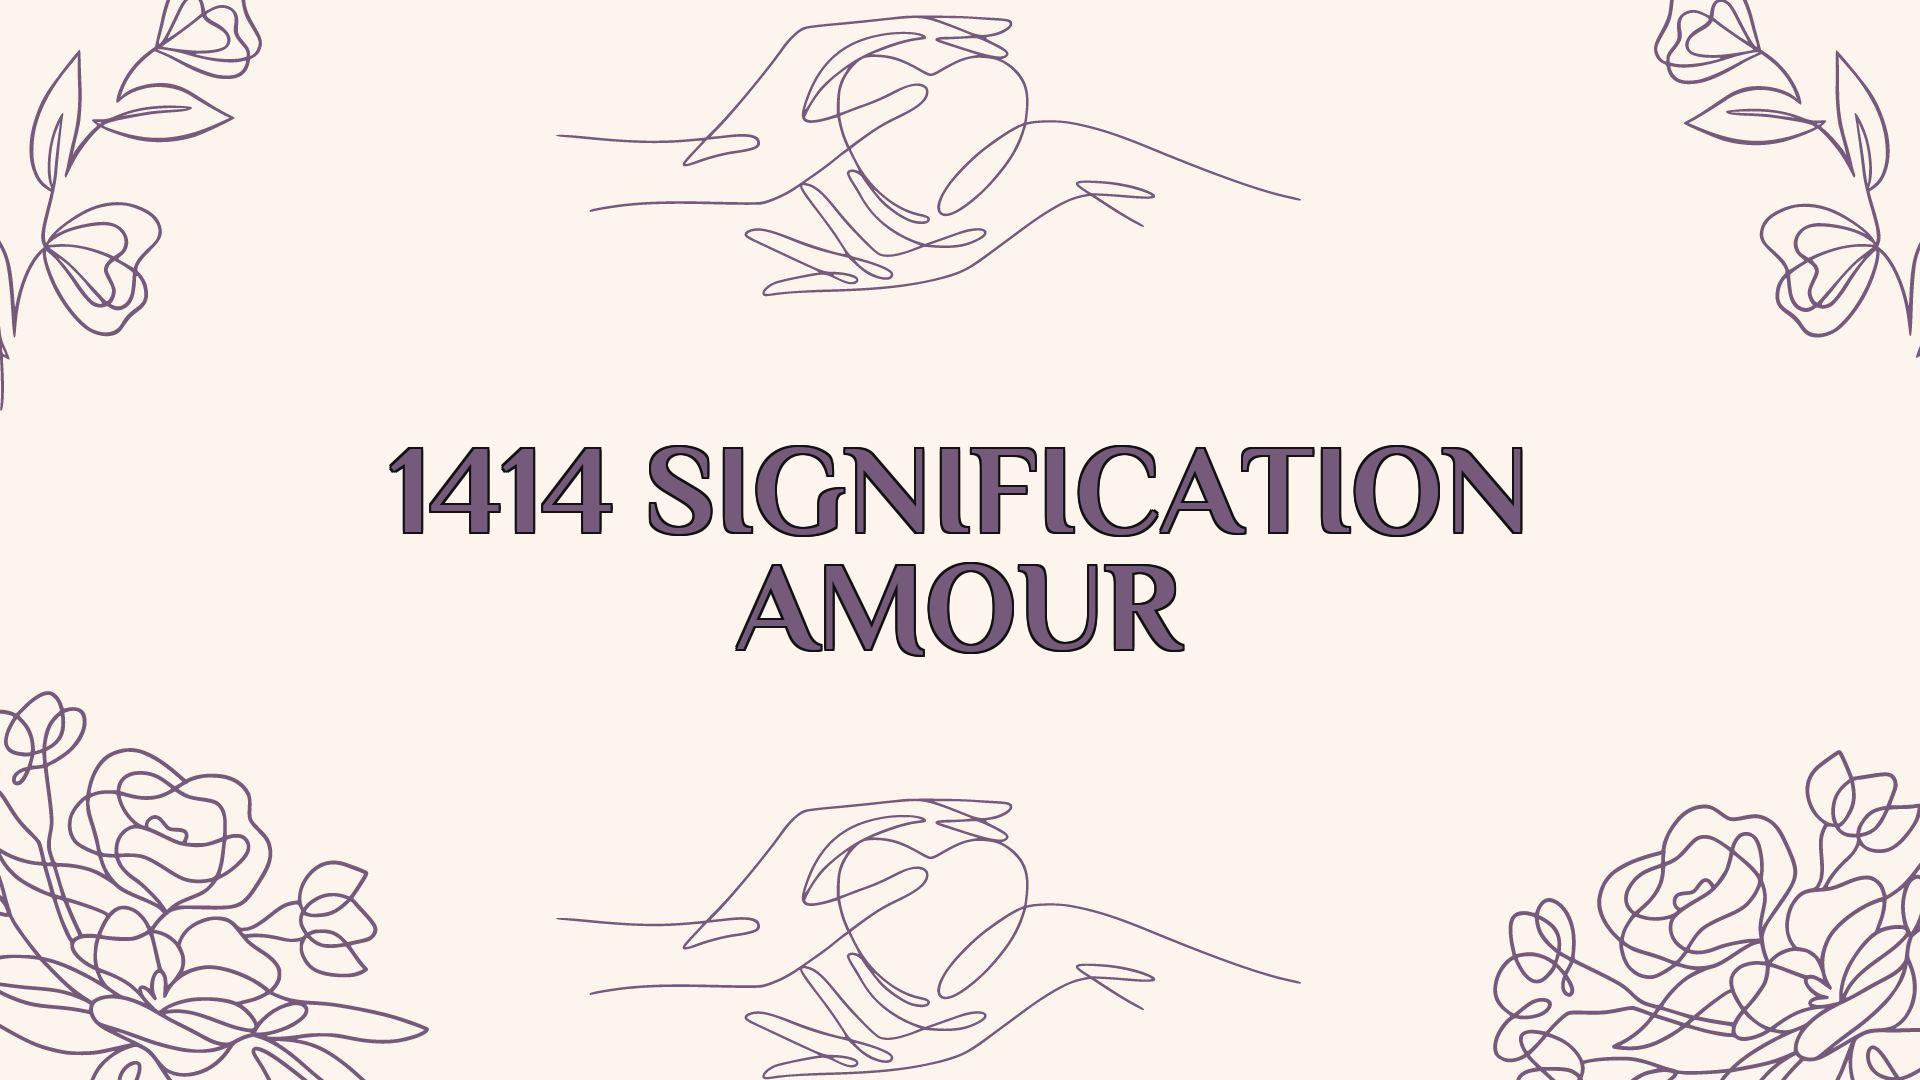 1414 signification amour